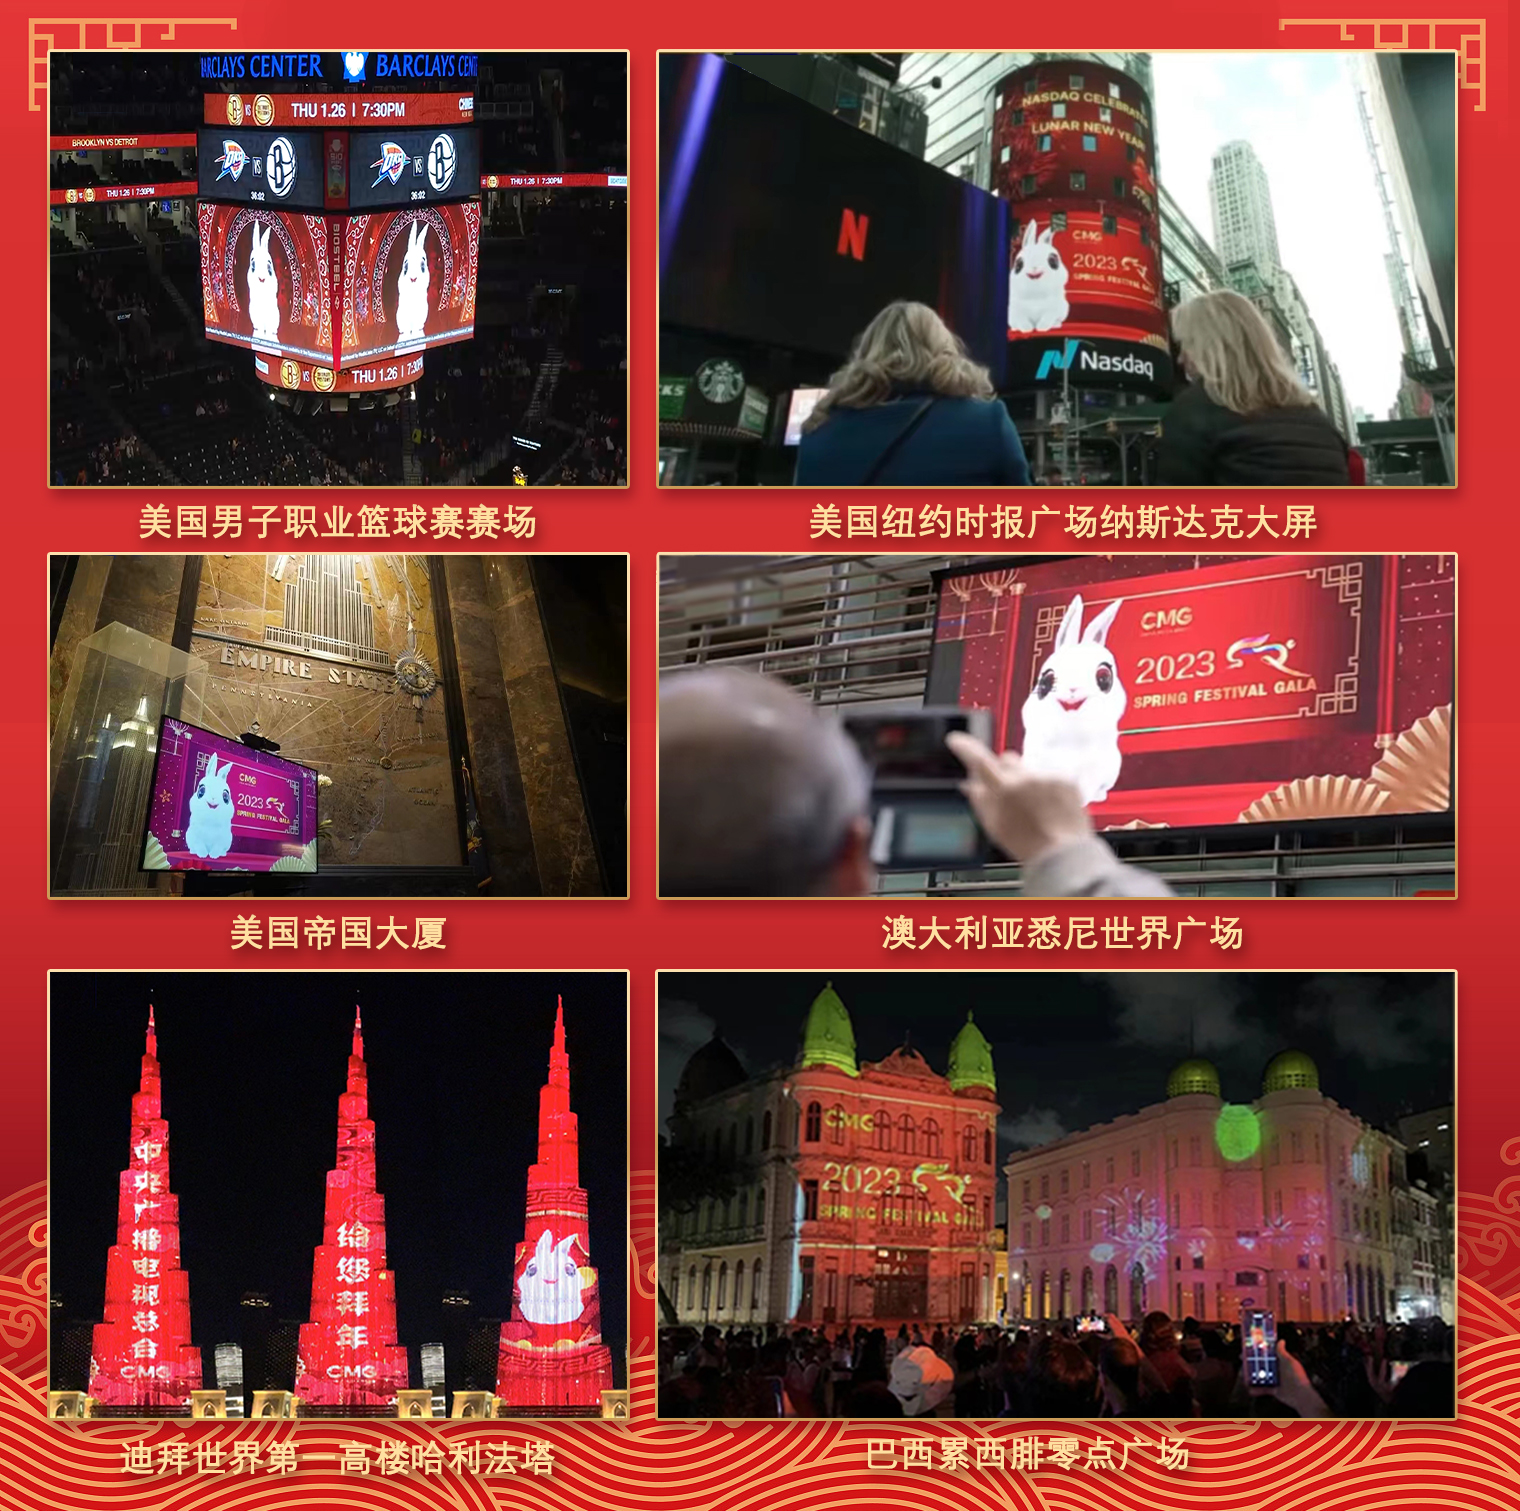 Spring Festival Gala promotional videos played on outdoor screens across the world. /CMG